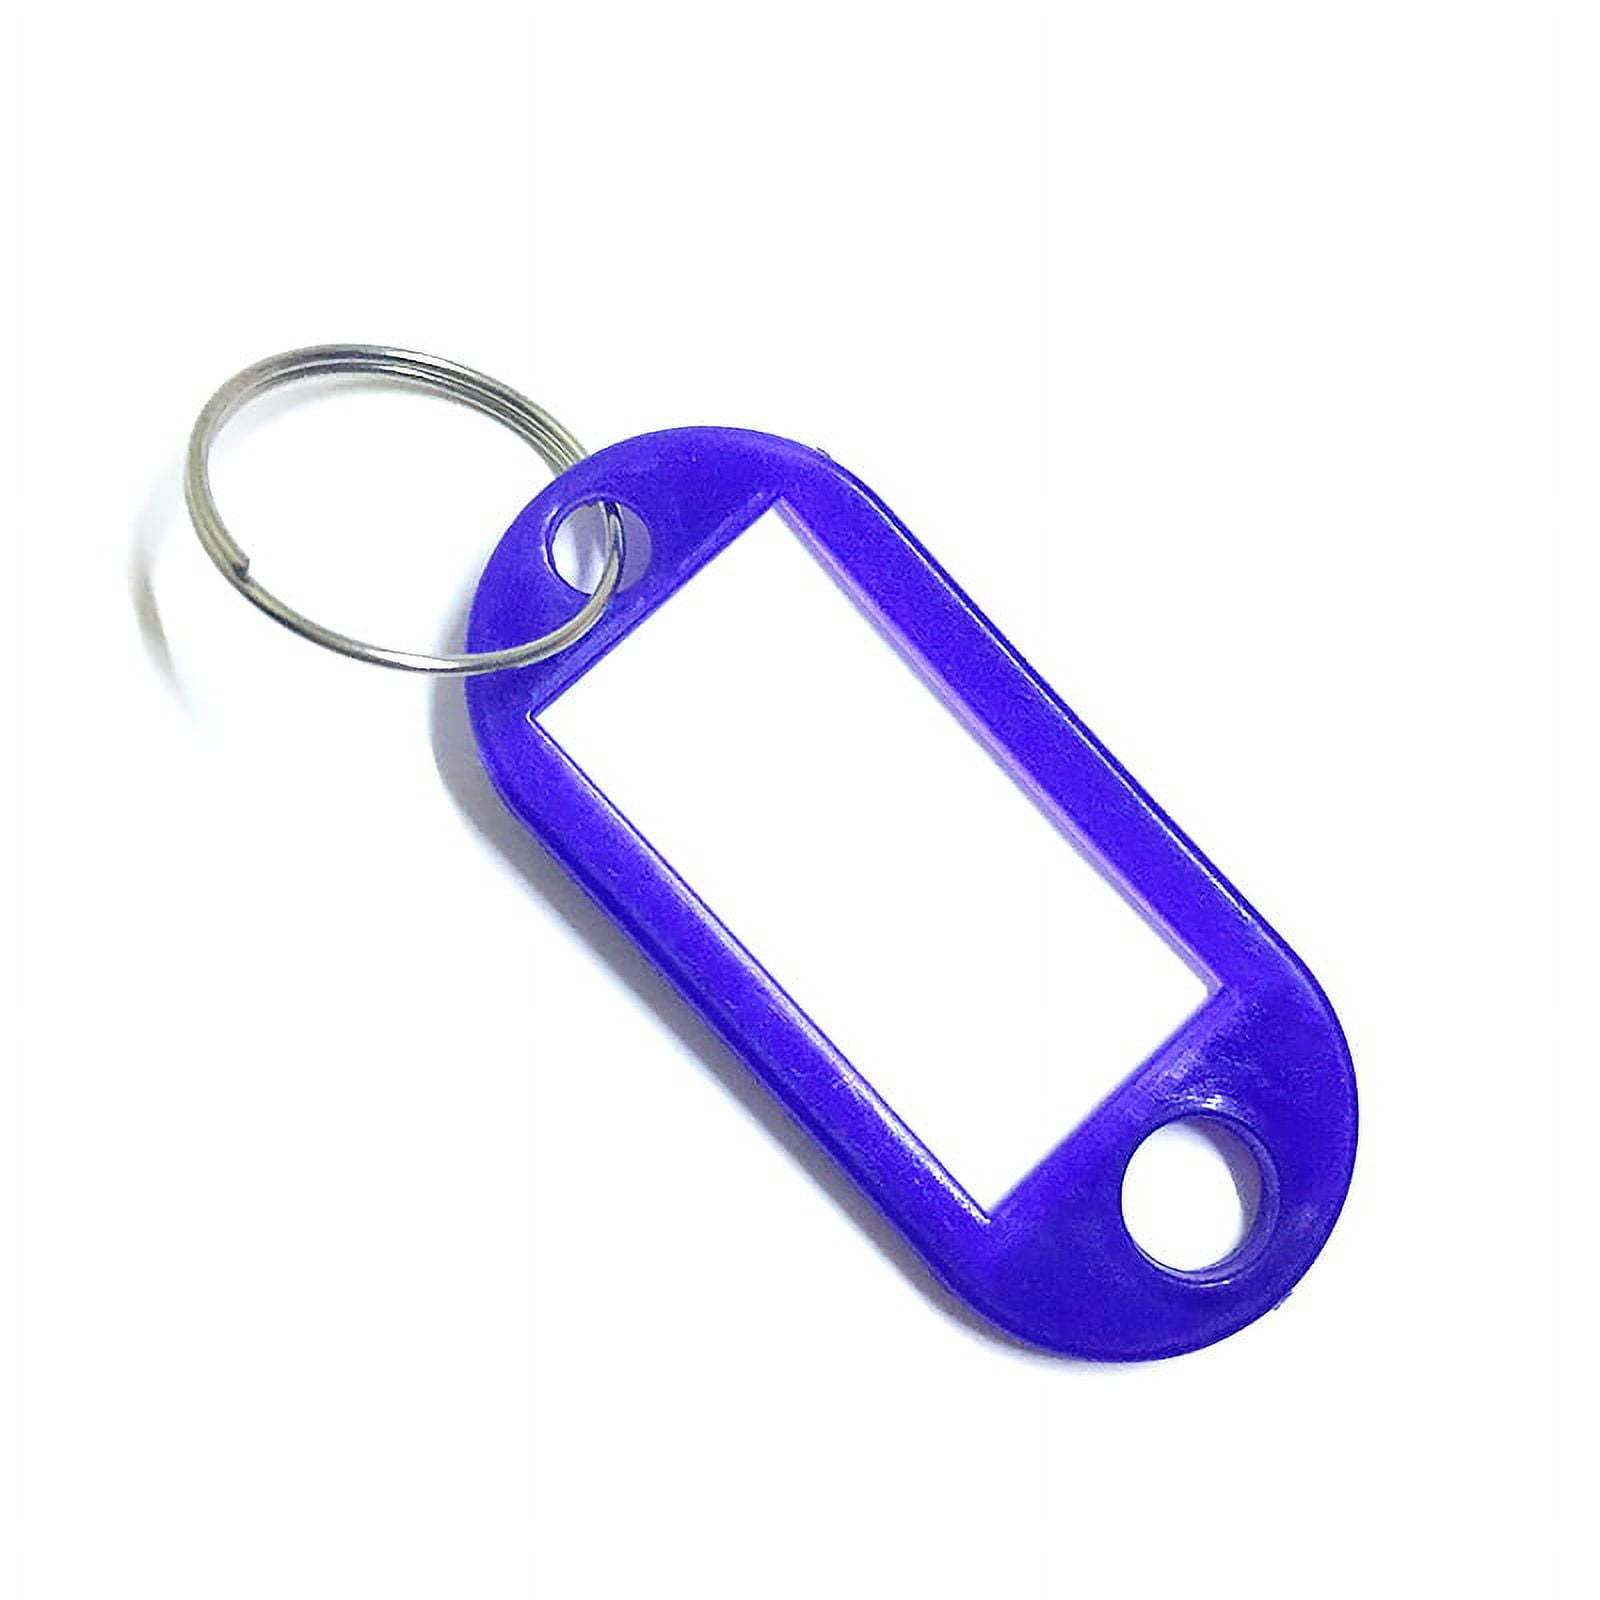 Plastic Id Holder Keychain Blank Key Ring Diy Name Tags For Baggage Paper  Insert Luggage Tags Mix Color Key Chain Accessories Chains253O From  Hgvd781, $27.08 | DHgate.Com